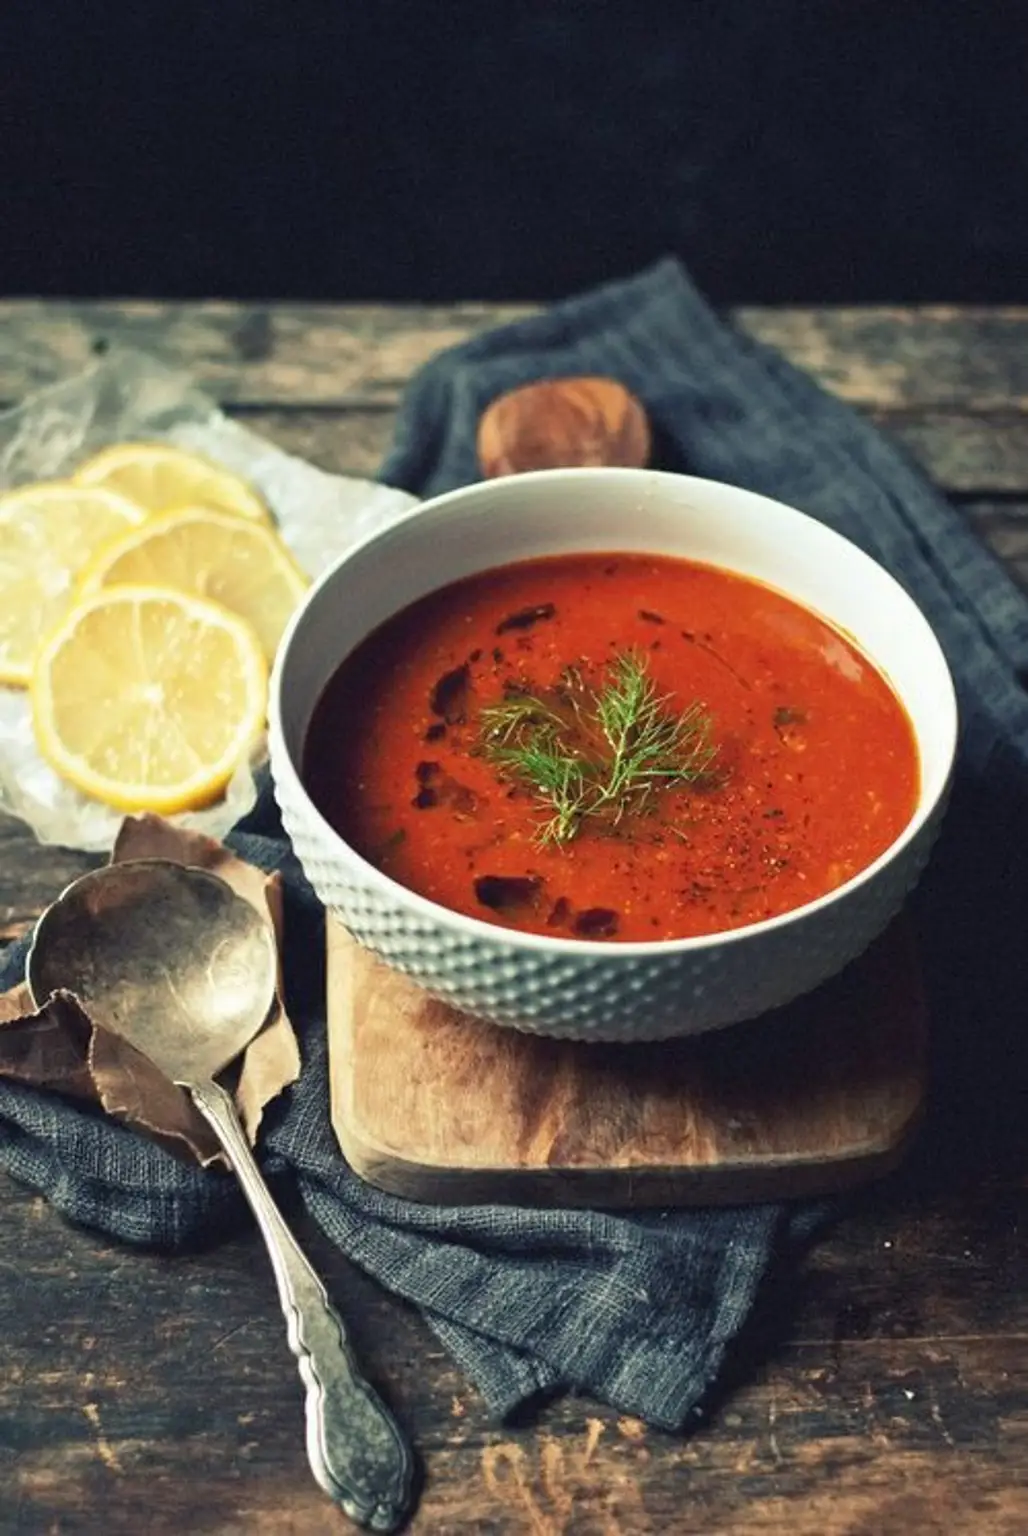 Caramelized Fennel, Roasted Garlic and Tomato Soup